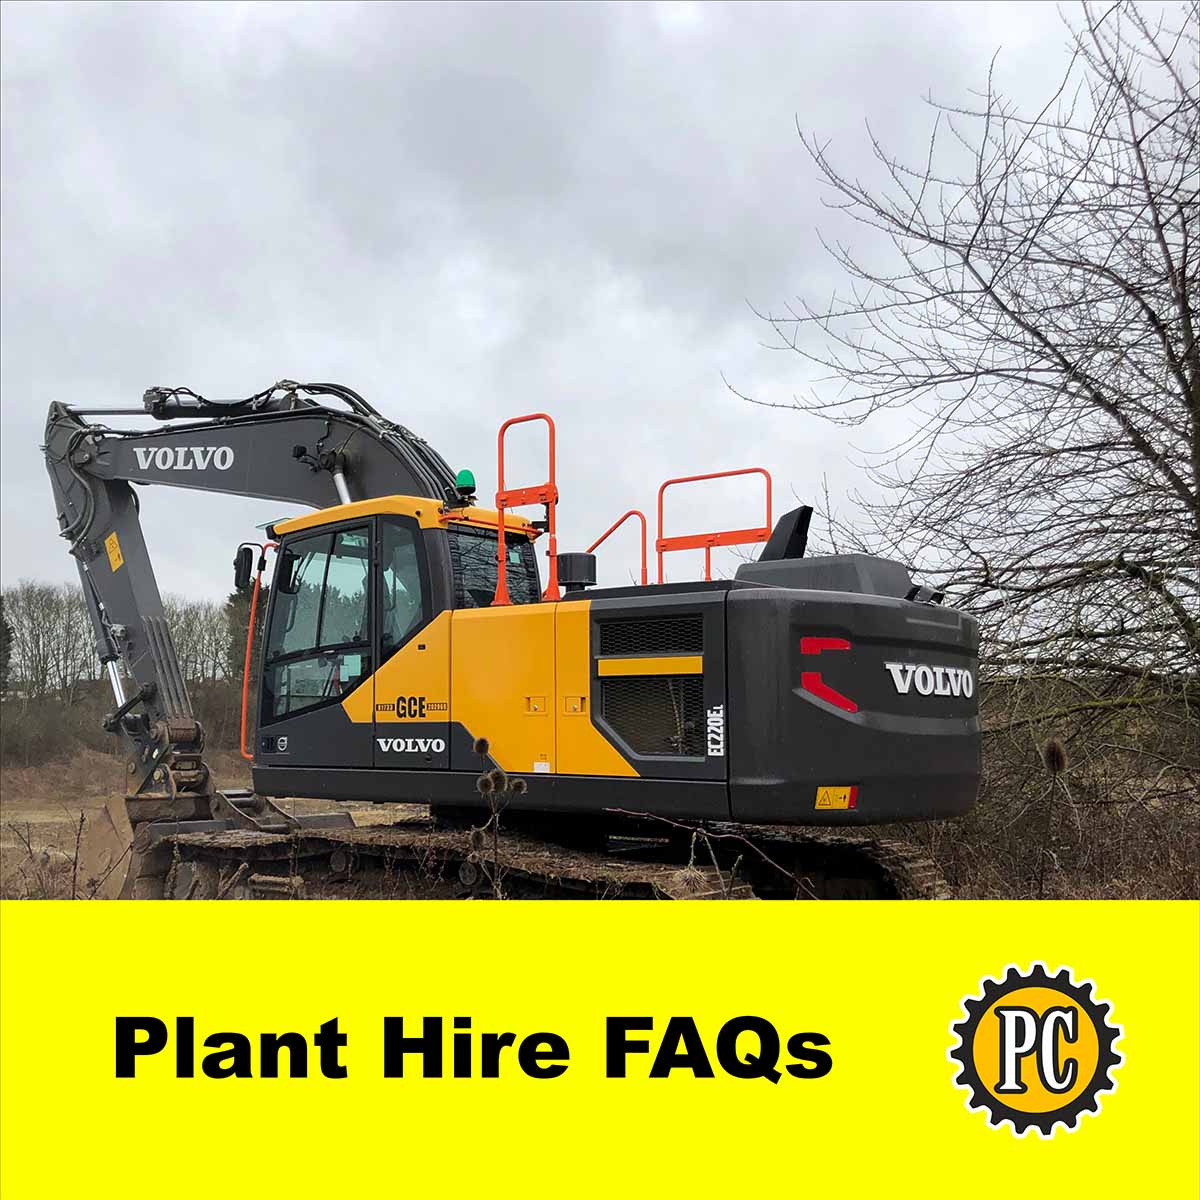 Plant Hire FAQs answered